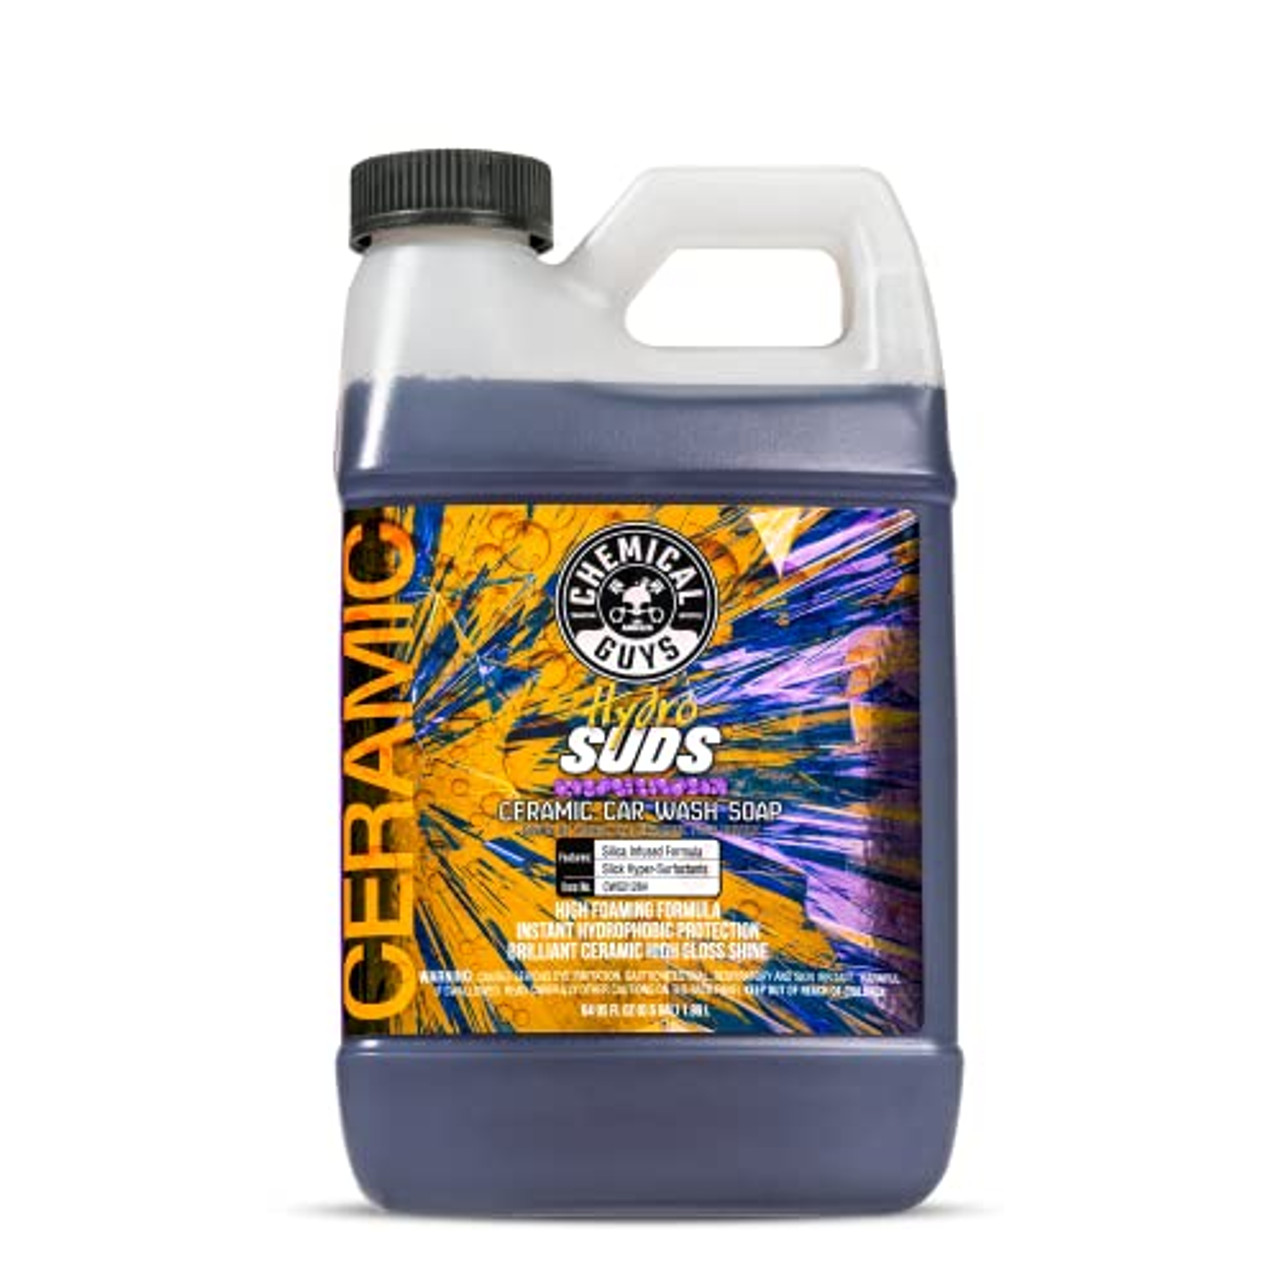 Chemical Guys 3pc Wash and Shine Cleaners